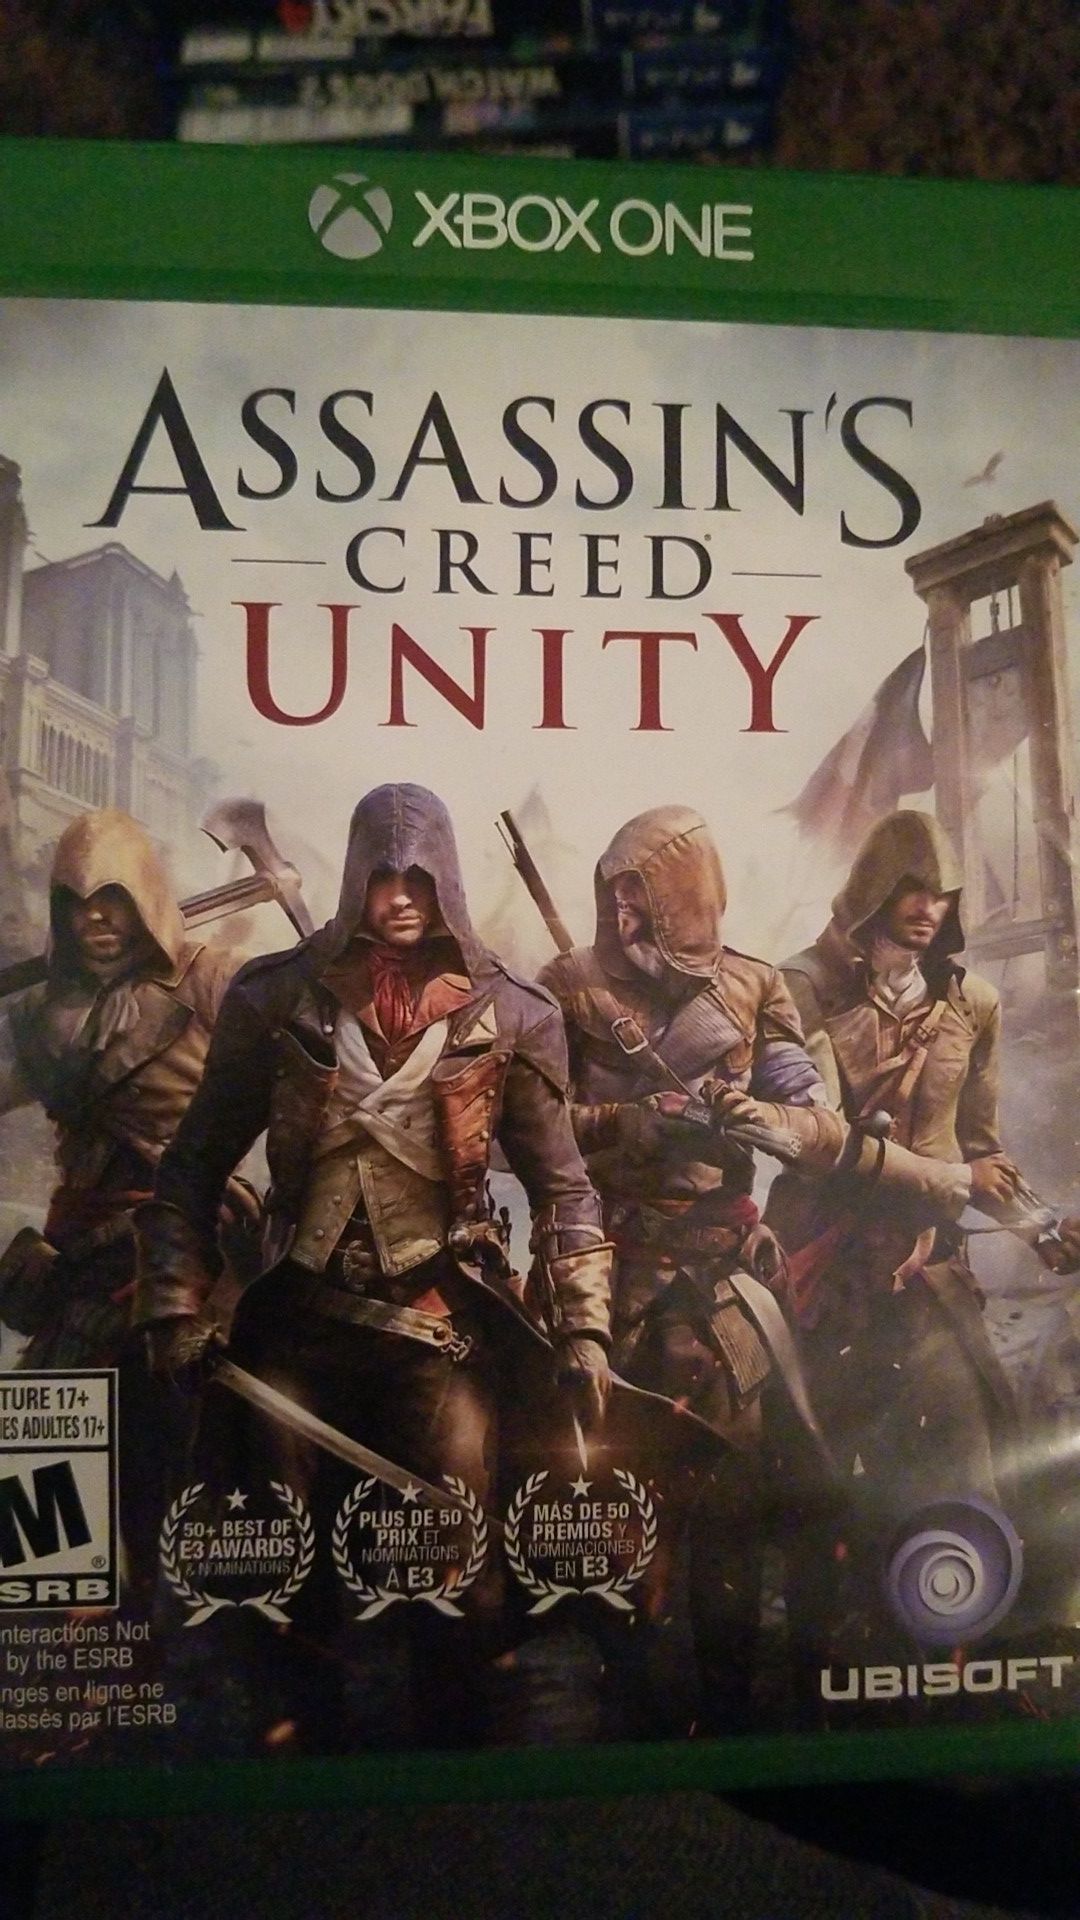 Video game--- Assassins Creed